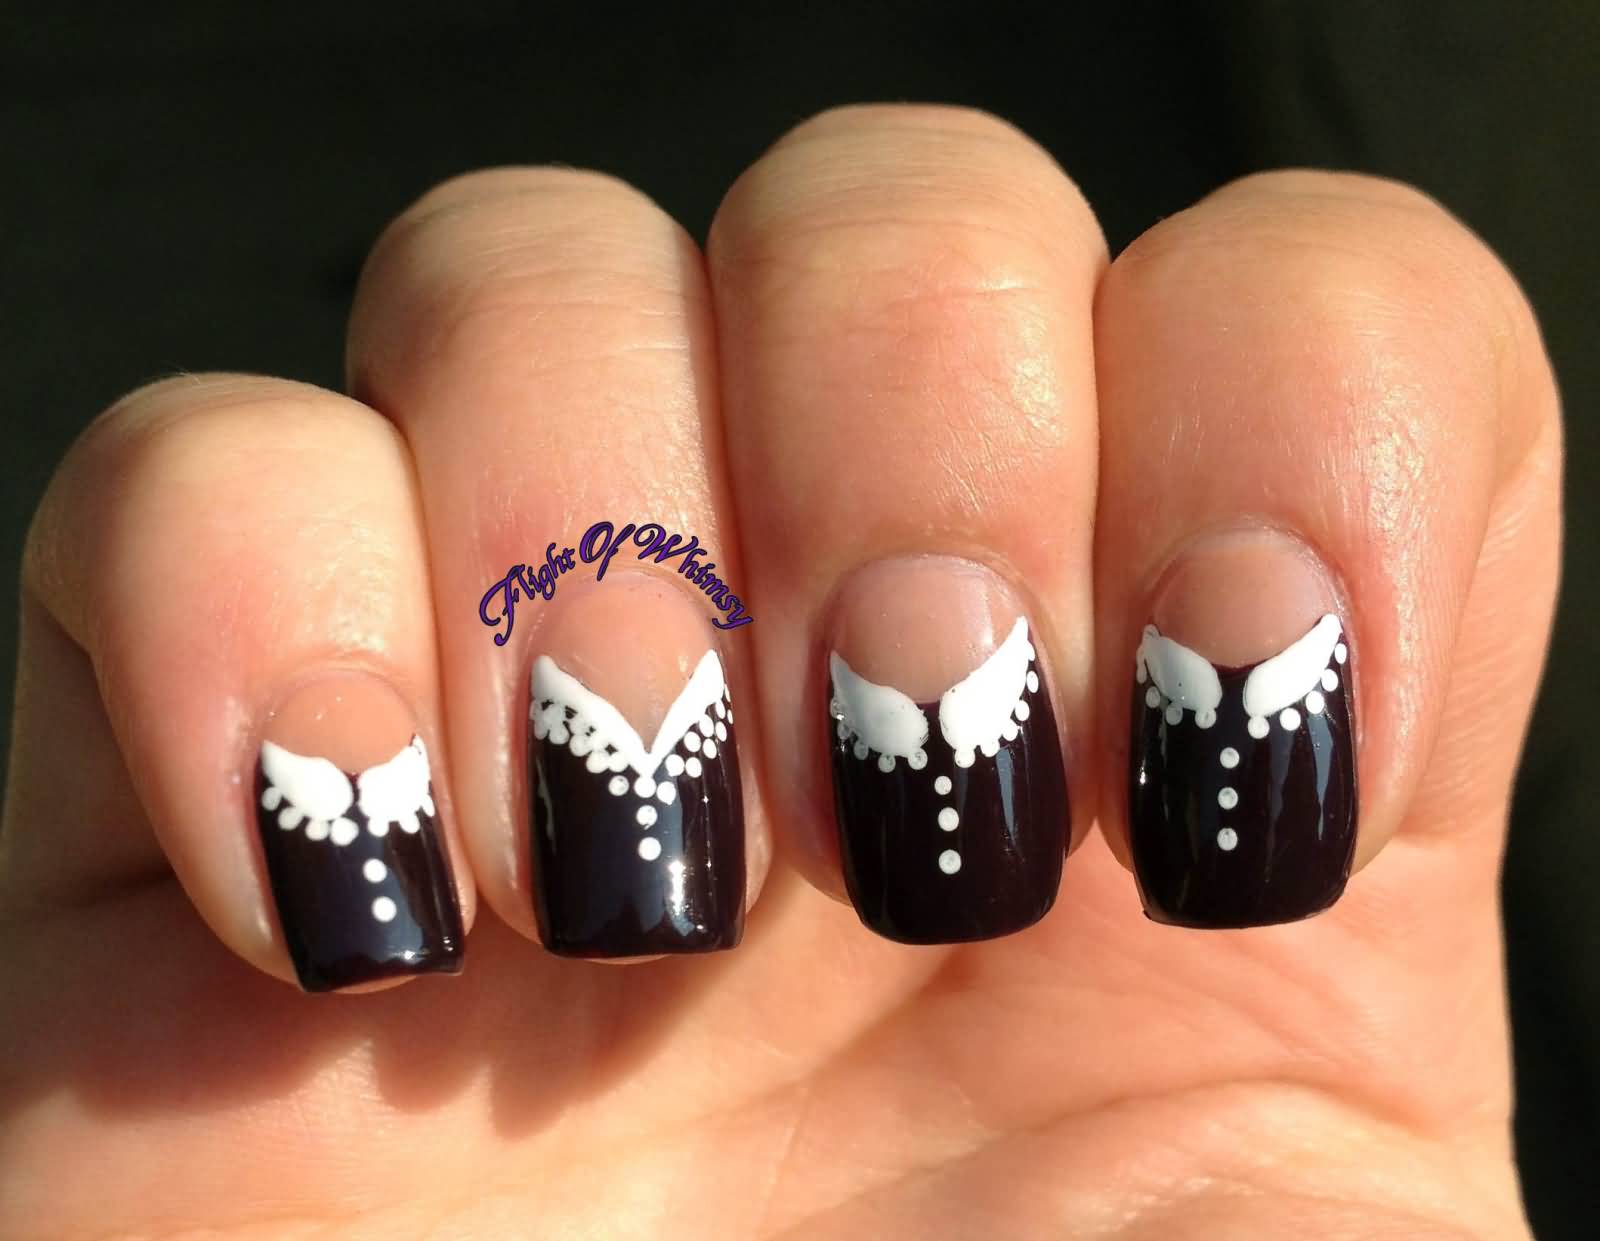 Black And White Nails With Negative Space Half Moon Nail Art Design Idea